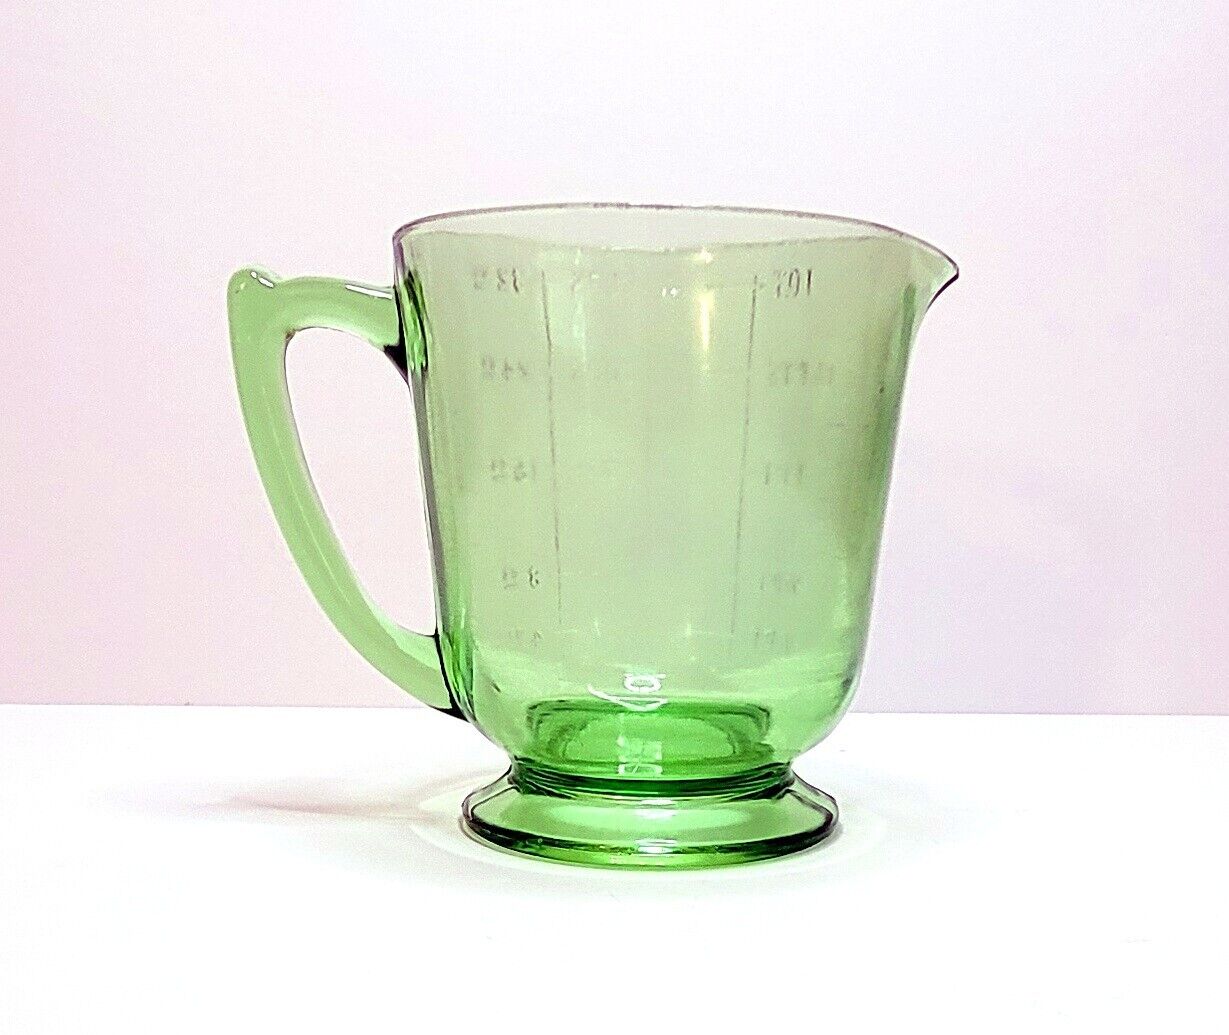 Gorgeous Vintage Depression Glass Green 4 Cup Measuring Pitcher Footed Atlas